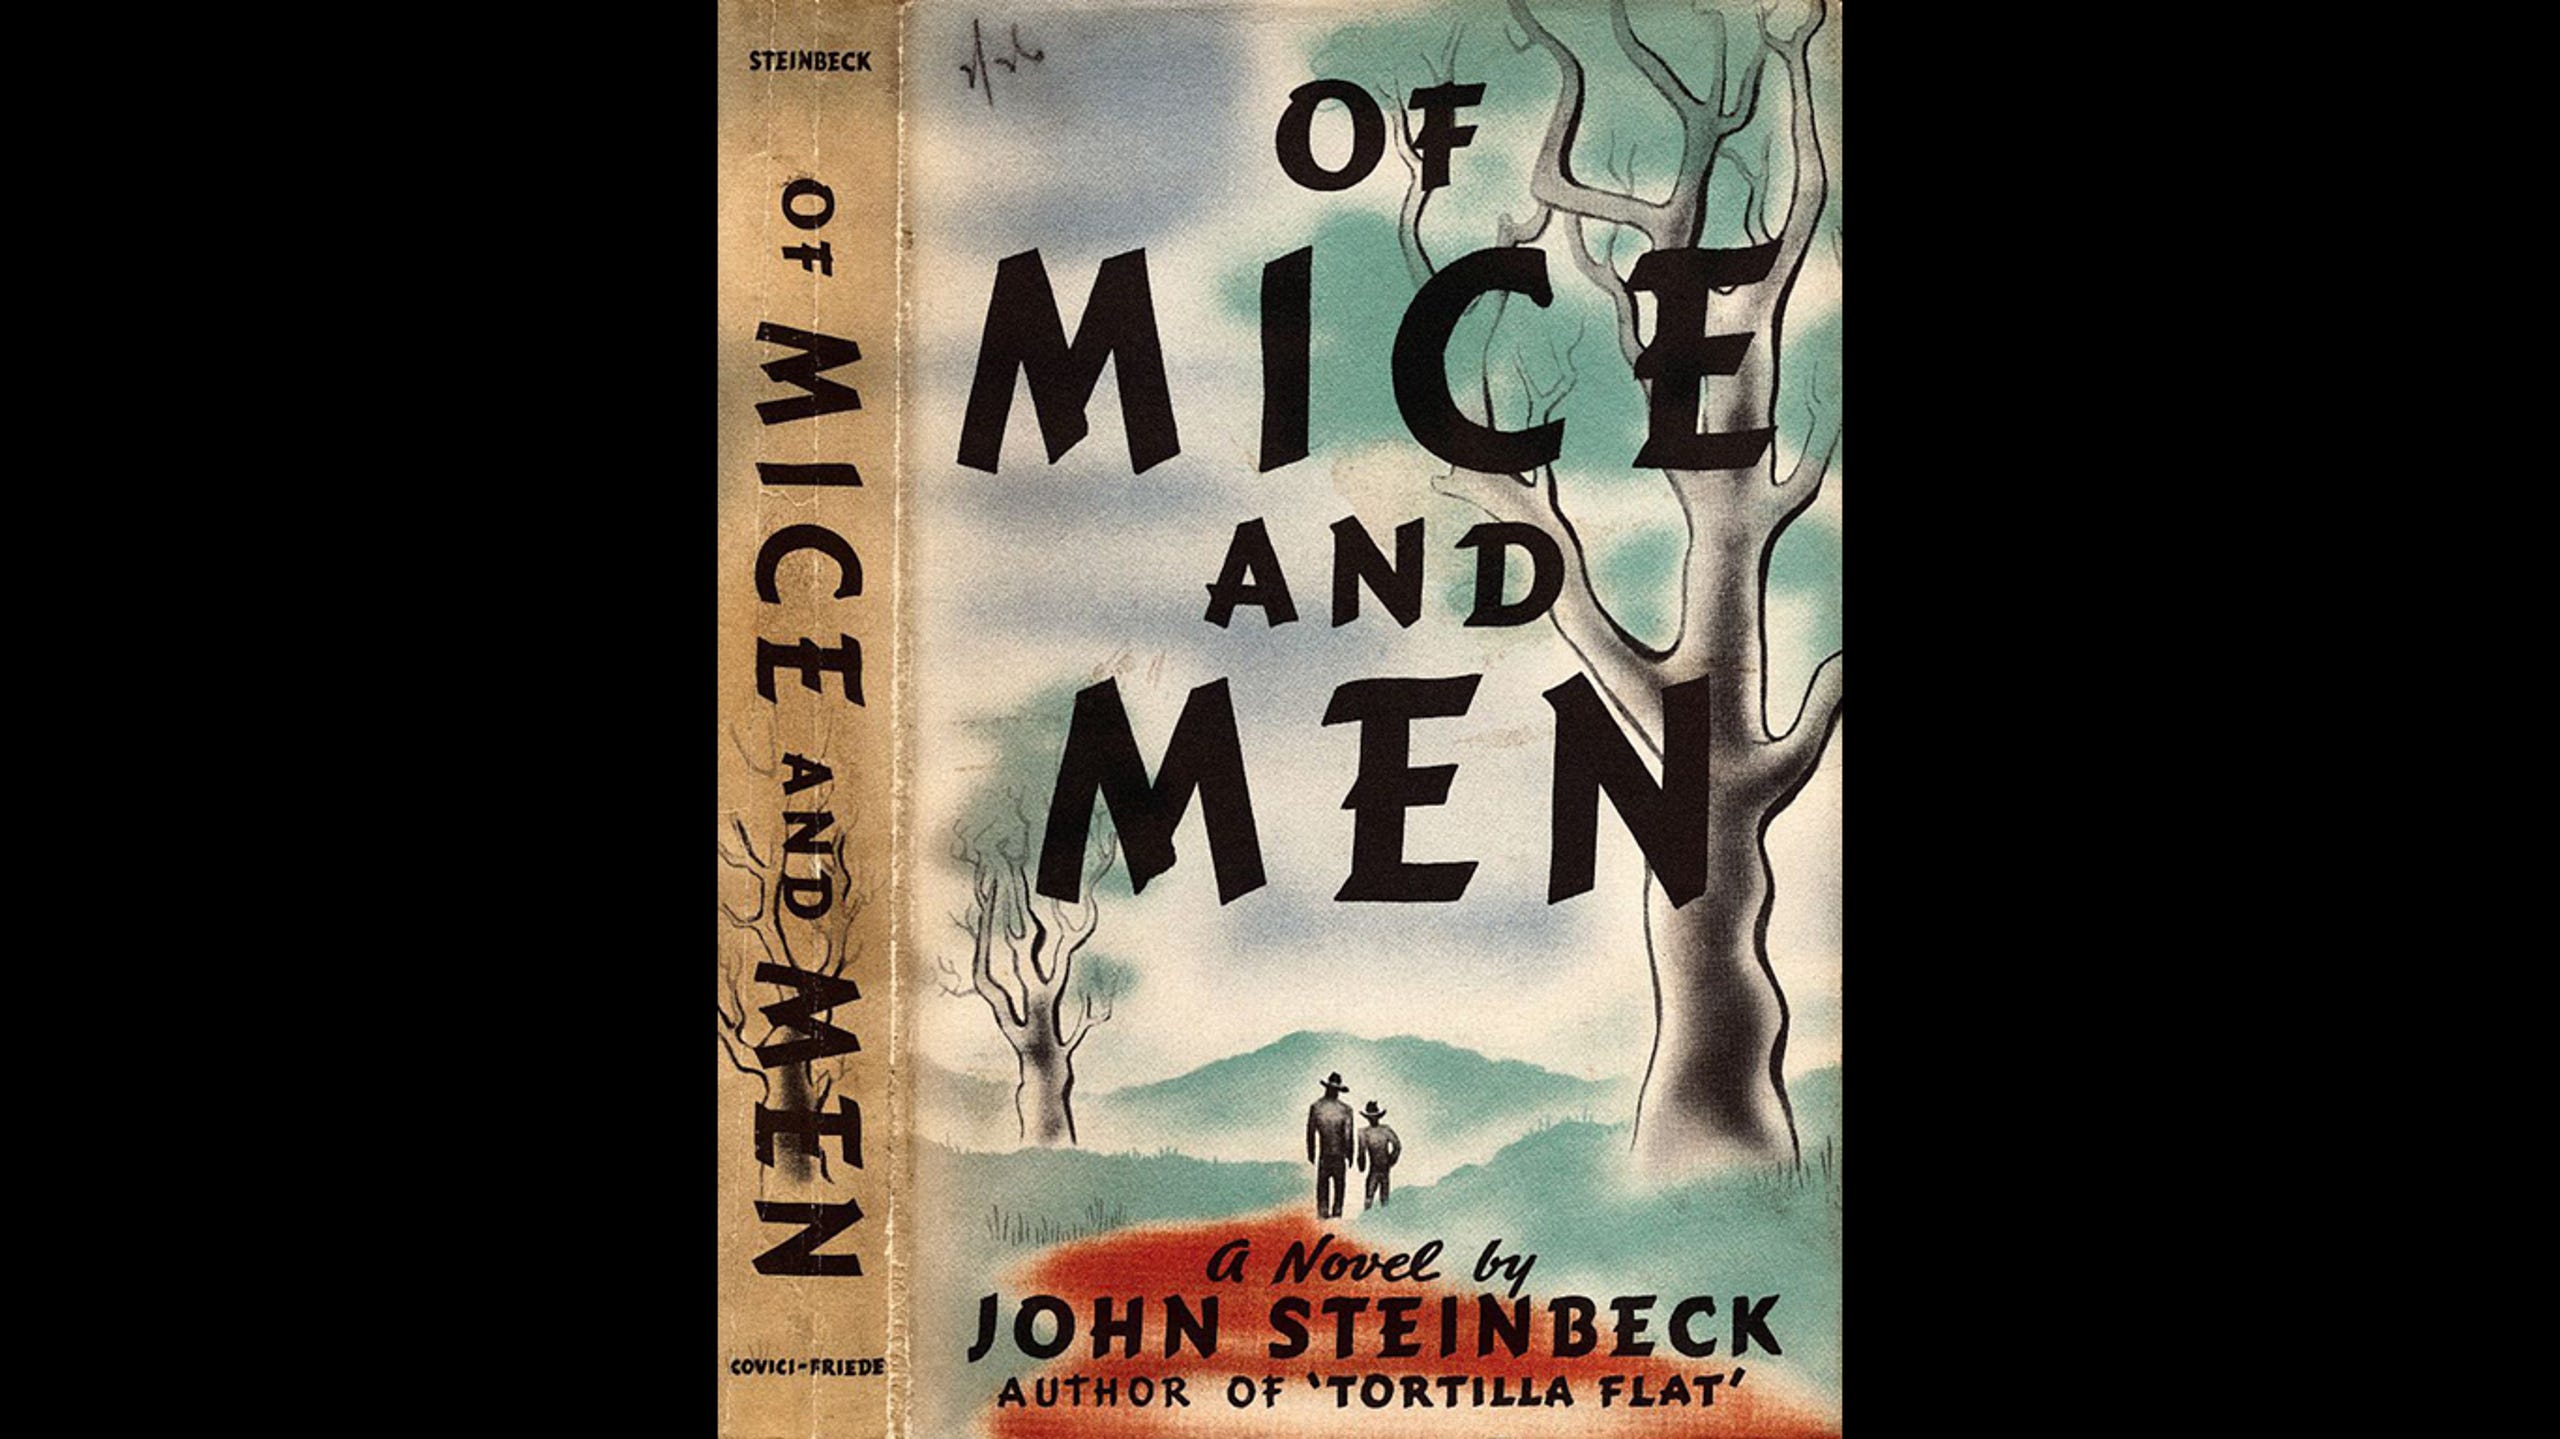 <strong>7. Of Mice and Men </strong><strong>• Author:</strong> John Steinbeck <strong>• Originally published in:</strong> 1937 <strong>• </strong>This story about two displaced men moving from one place to another to find jobs offers resonating lessons to many. The two men are courageously following their dream, while showing the effects of isolation on people. The main characters, Lennie and George, have each other, which provides comfort as their isolation from society intensifies.